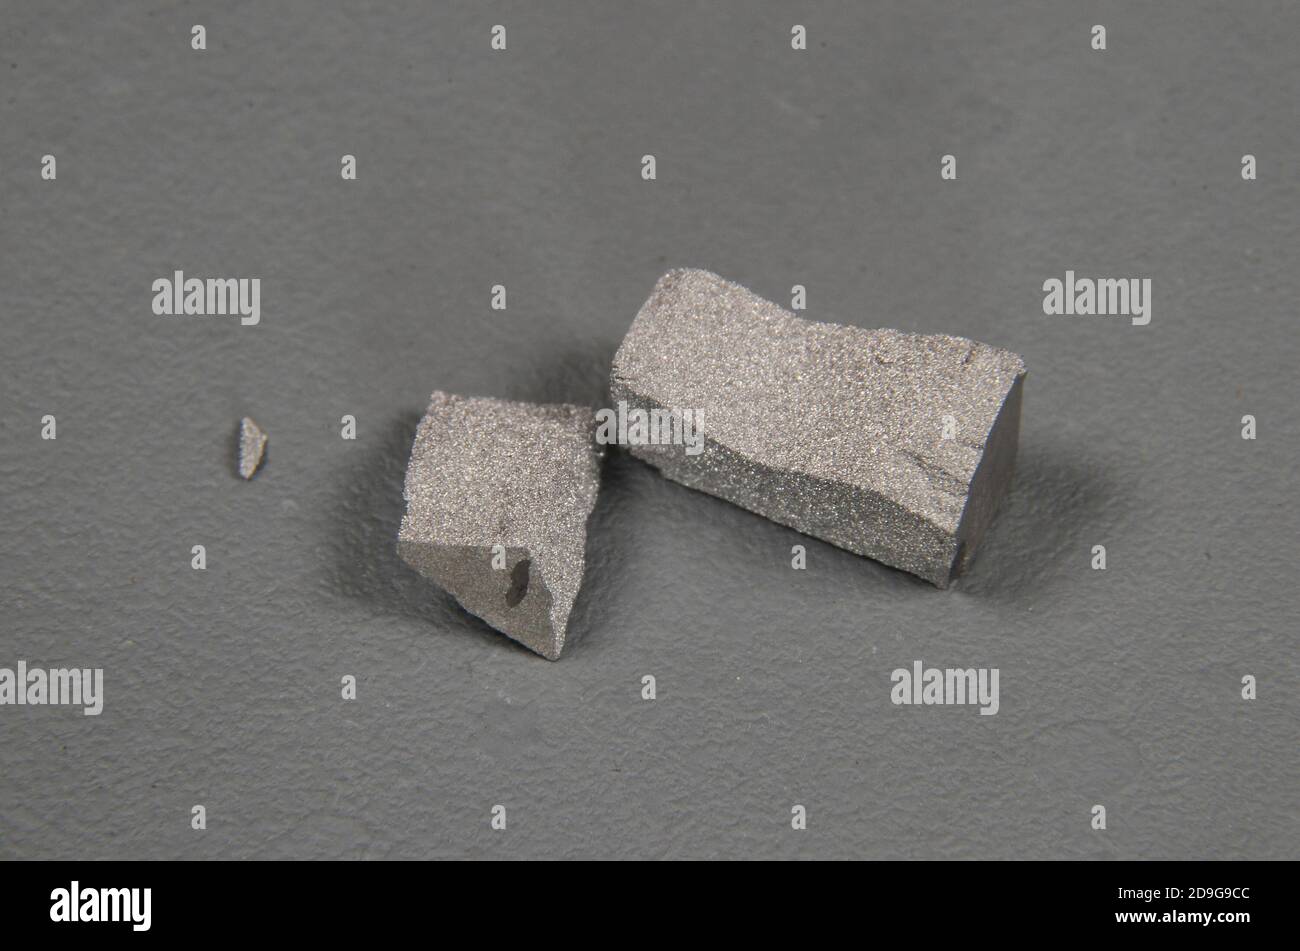 Two small pieces of Tungsten metal (W) Stock Photo